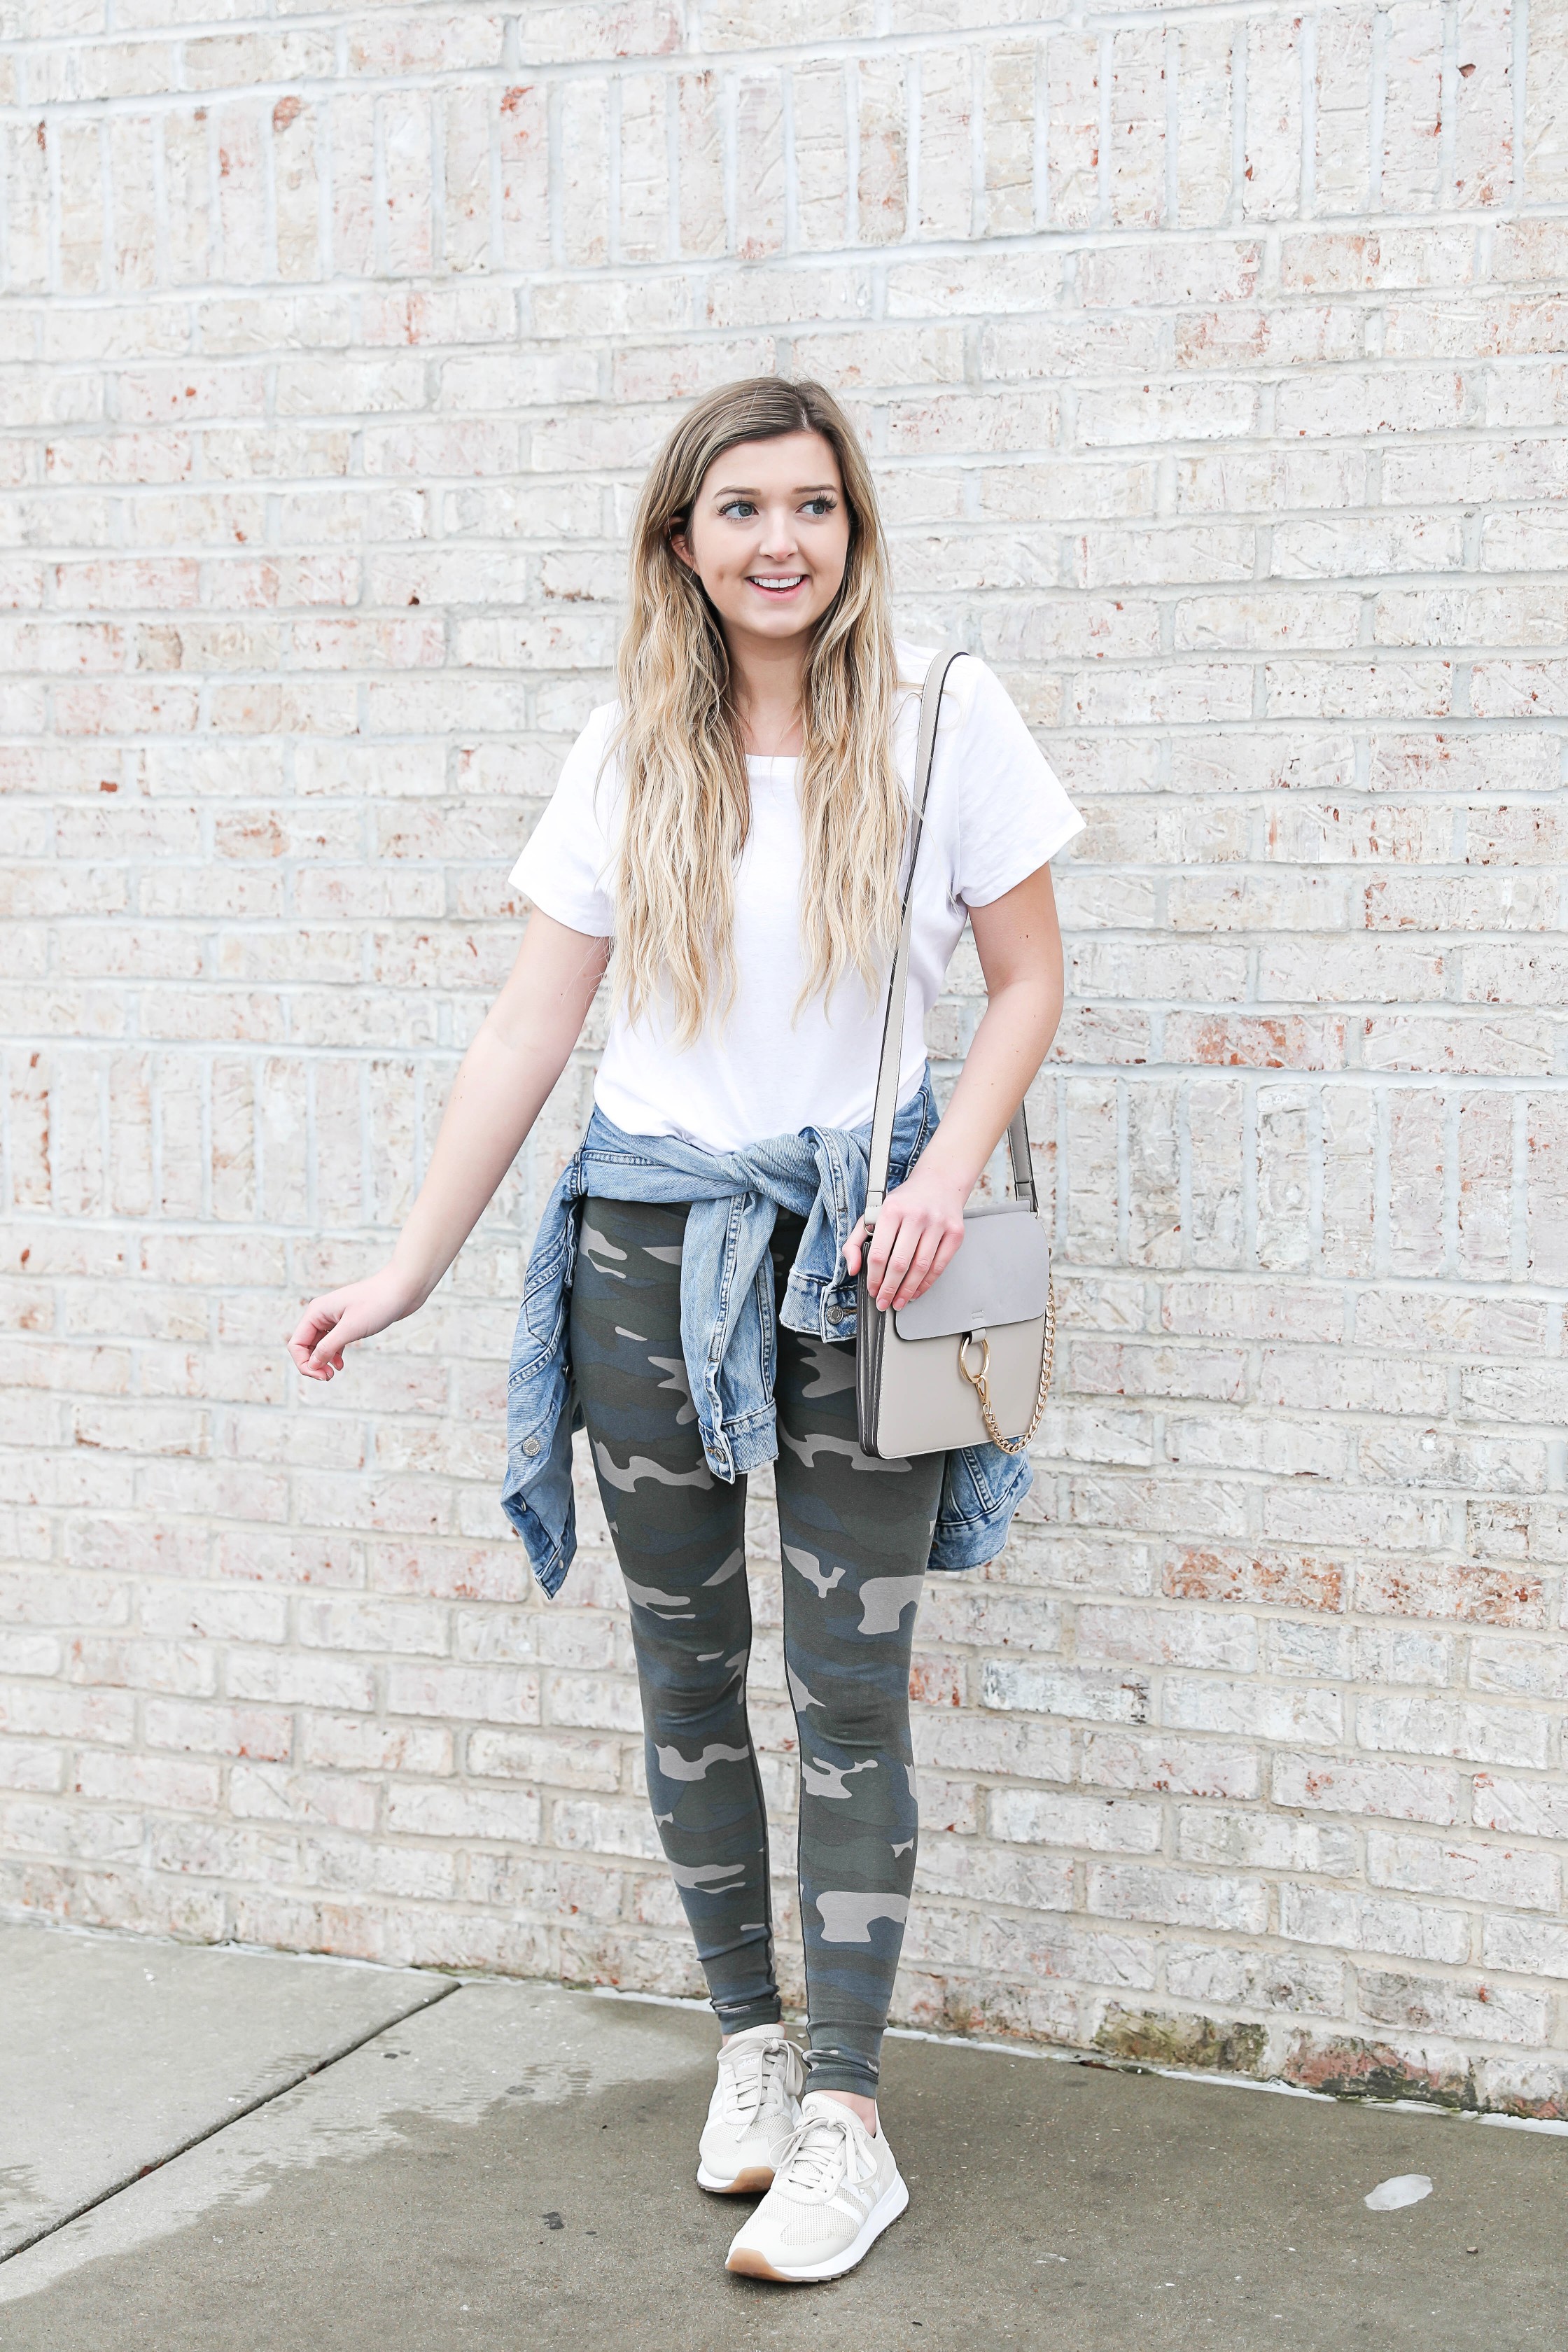 Cute camo leggings paired with a plain white tee and jean jacket! Cute way to style camo leggings, I love this trend! Camouflage is so in and makes of a cute winter outfit! This would also be cute for spring style or any time of year you want a casual look! Details on fashion blog daily dose of charm by lauren lindmark